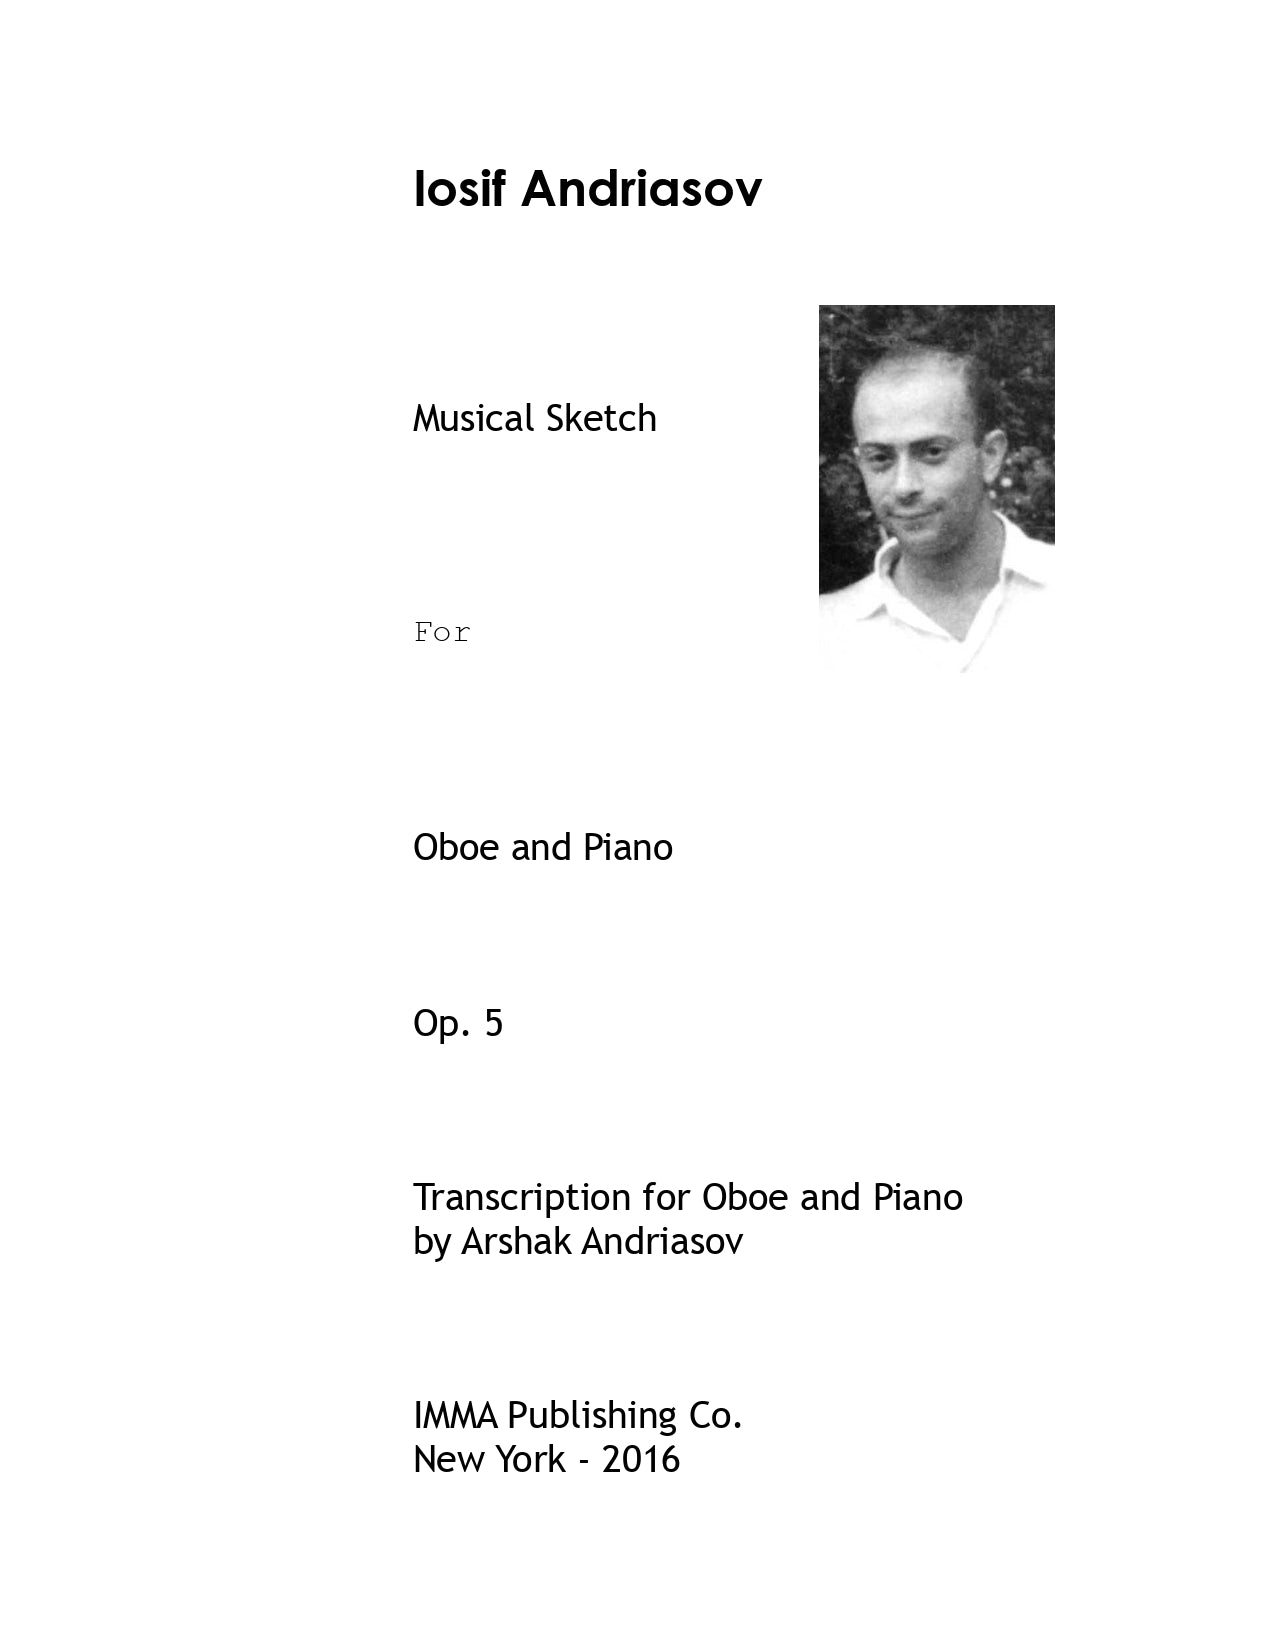 017. Iosif Andriasov: Musical Sketch, Op. 5 for Oboe and Piano.